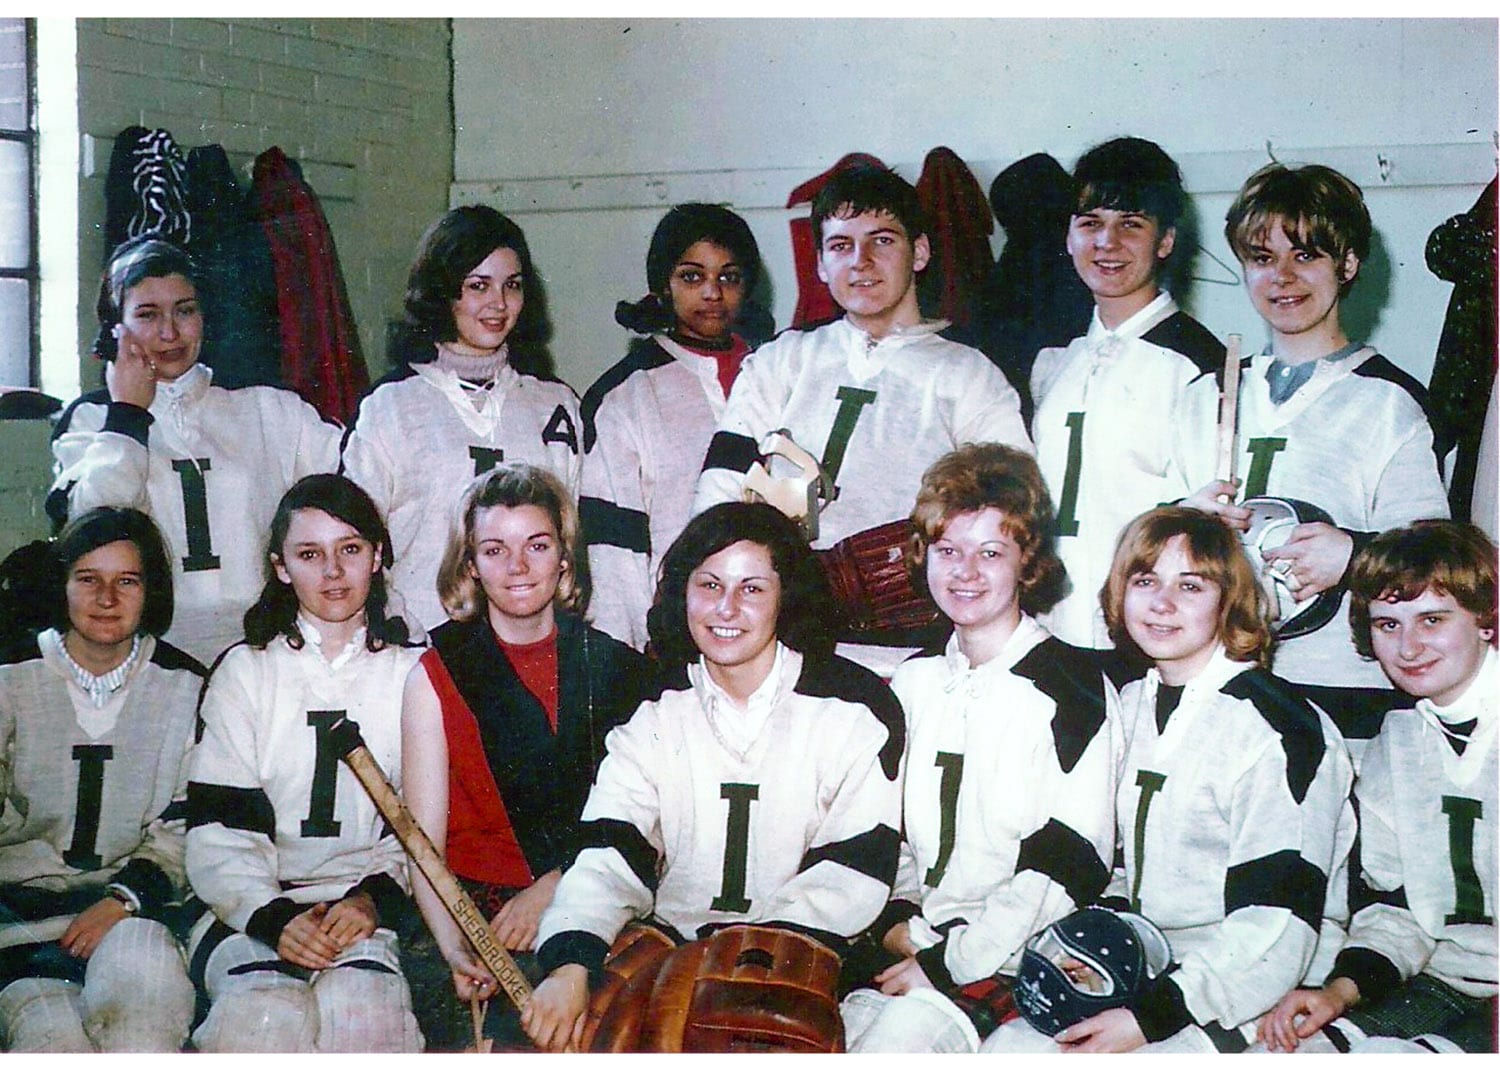 Women's Hockey Team posing for a photo. They are dressed in their uniforms and holding hockey equipment.